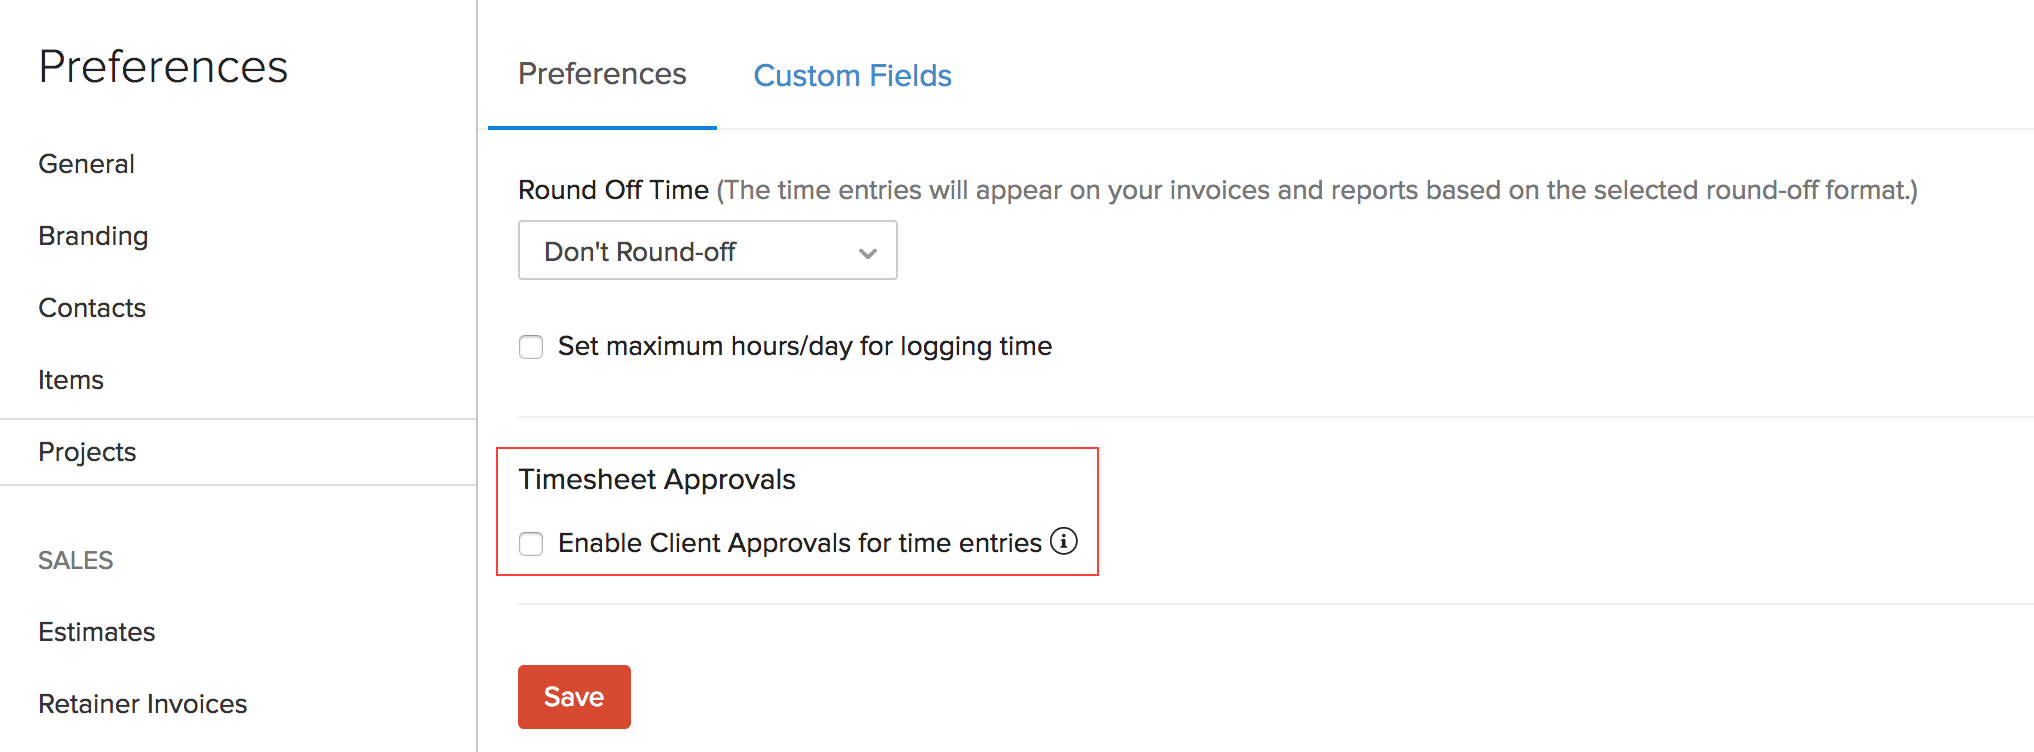 Other Actions in Client Approvals